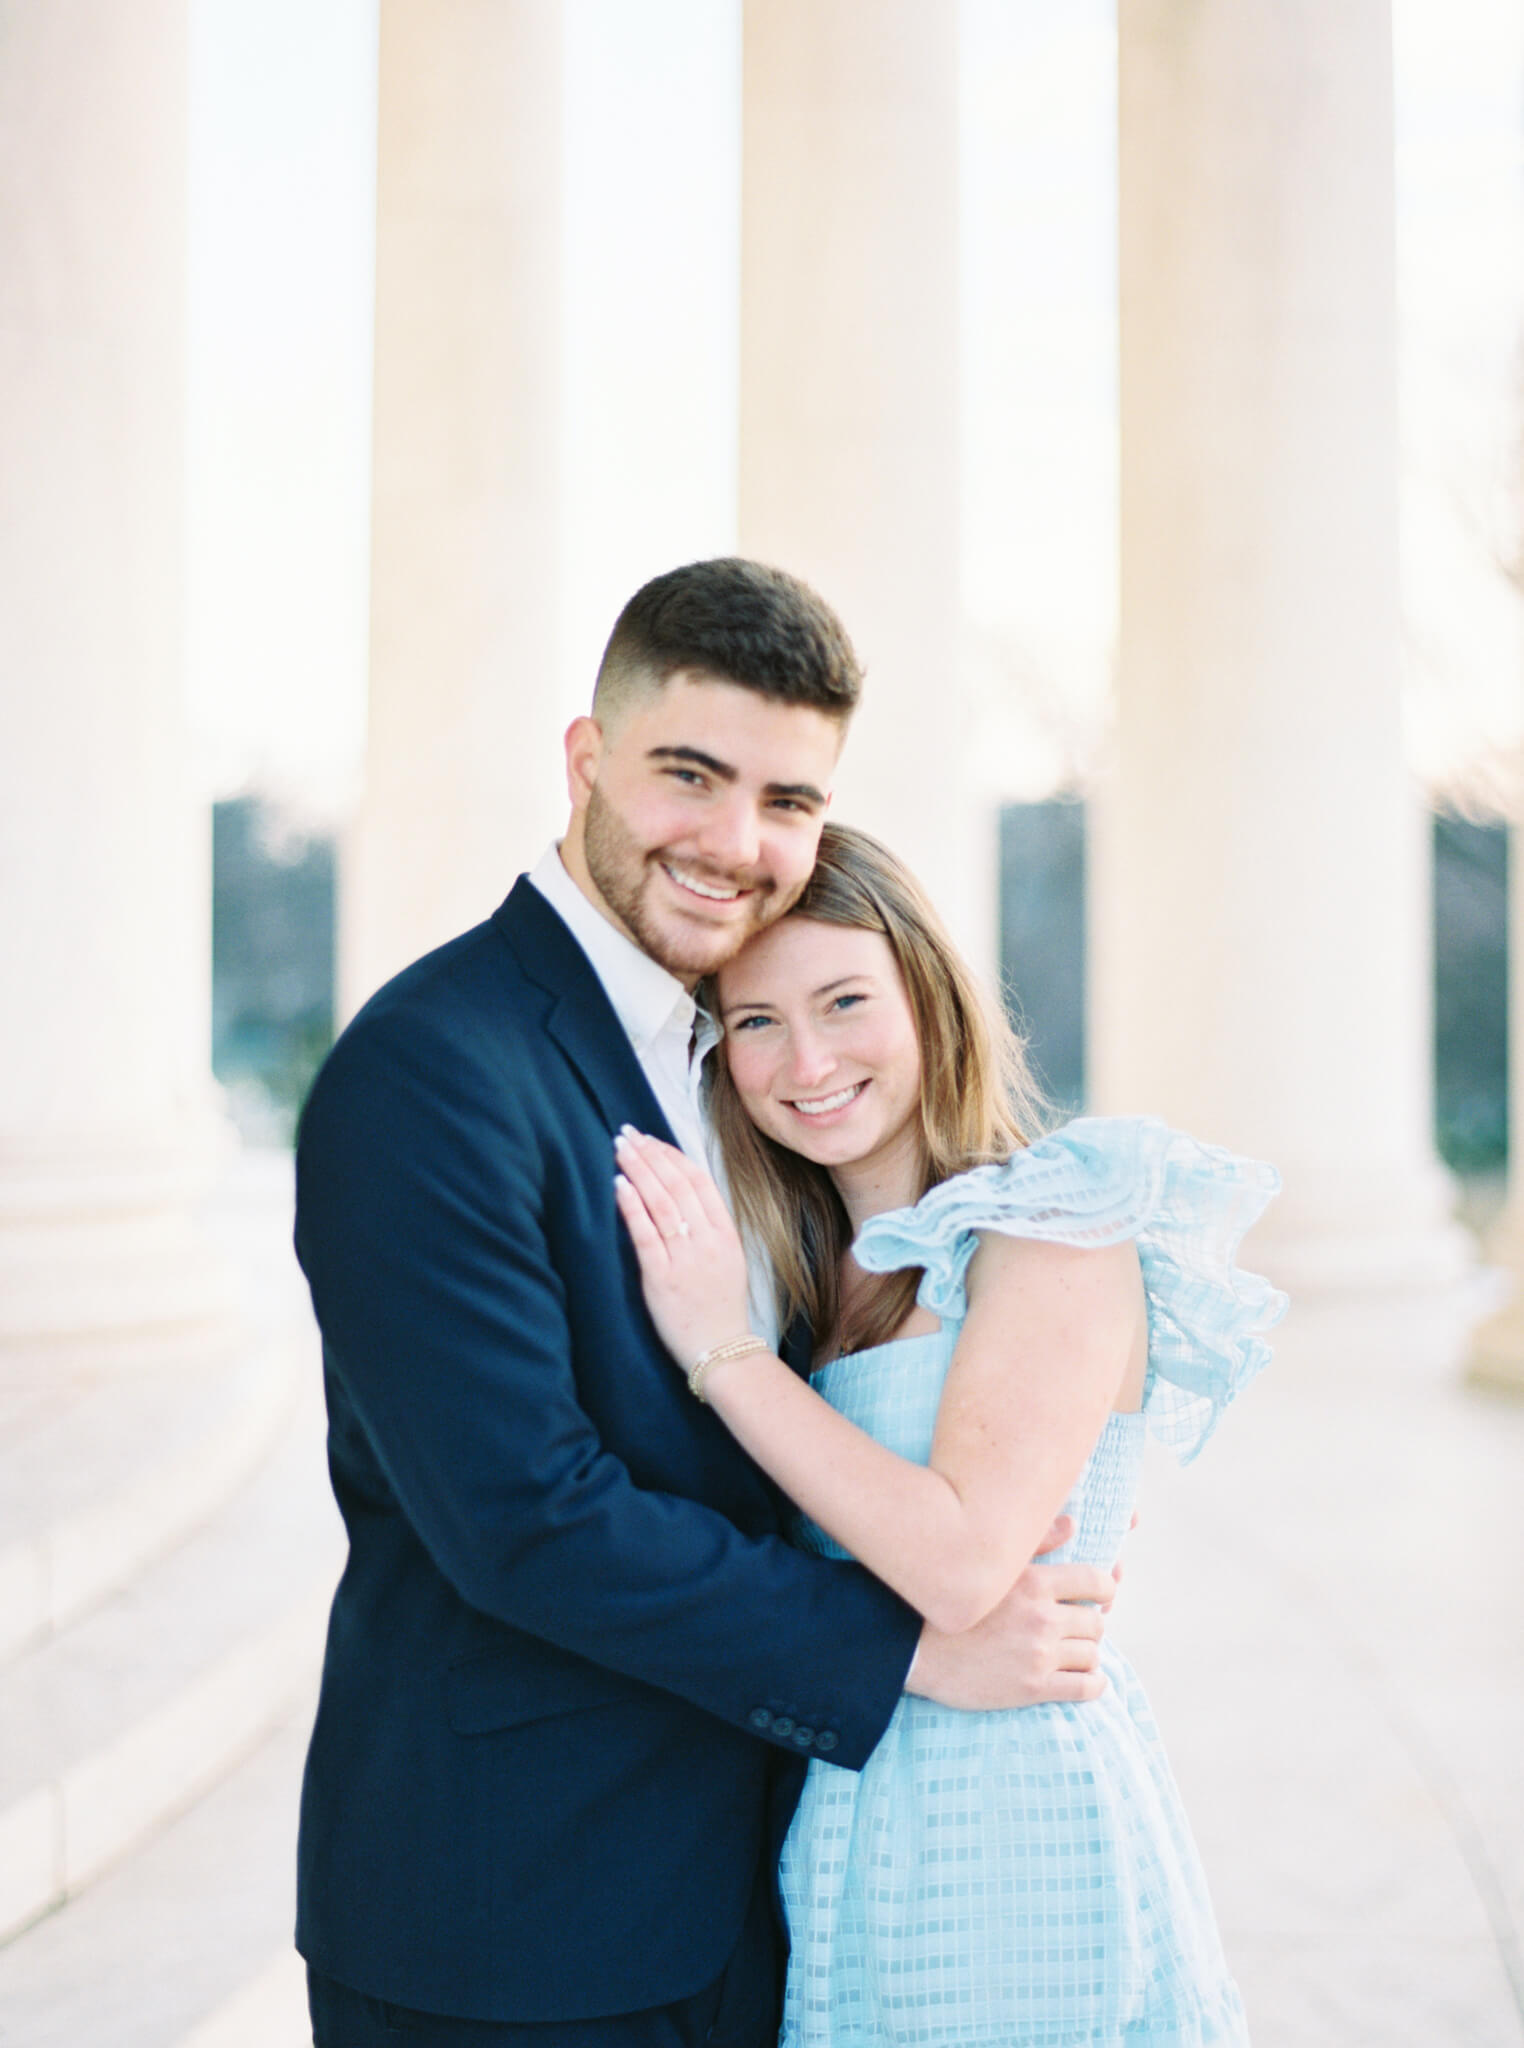 A young man in a navy blue suit holding his fiancée in a light blue dress close during their Jefferson Memorial Engagement Photos with marble columns in the background